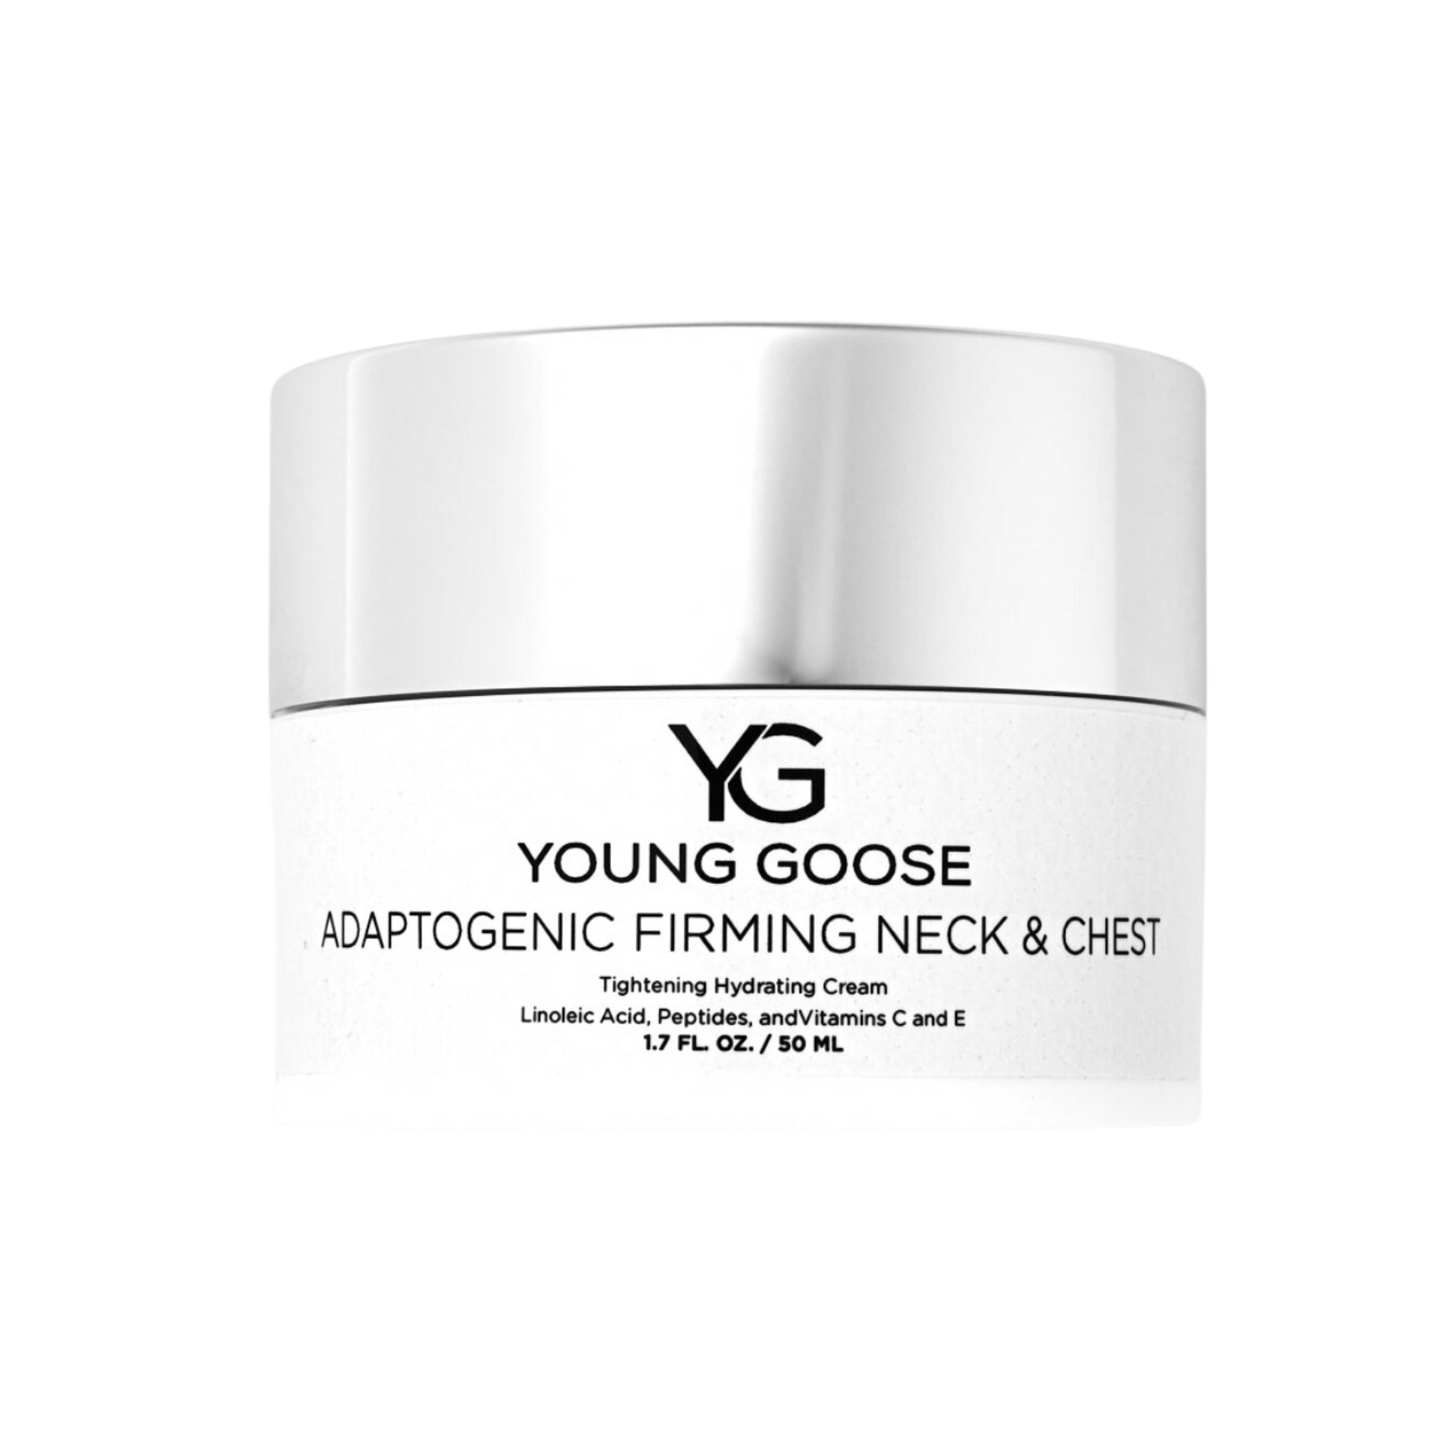 Young Goose Adaptogenic Firming Neck & Chest